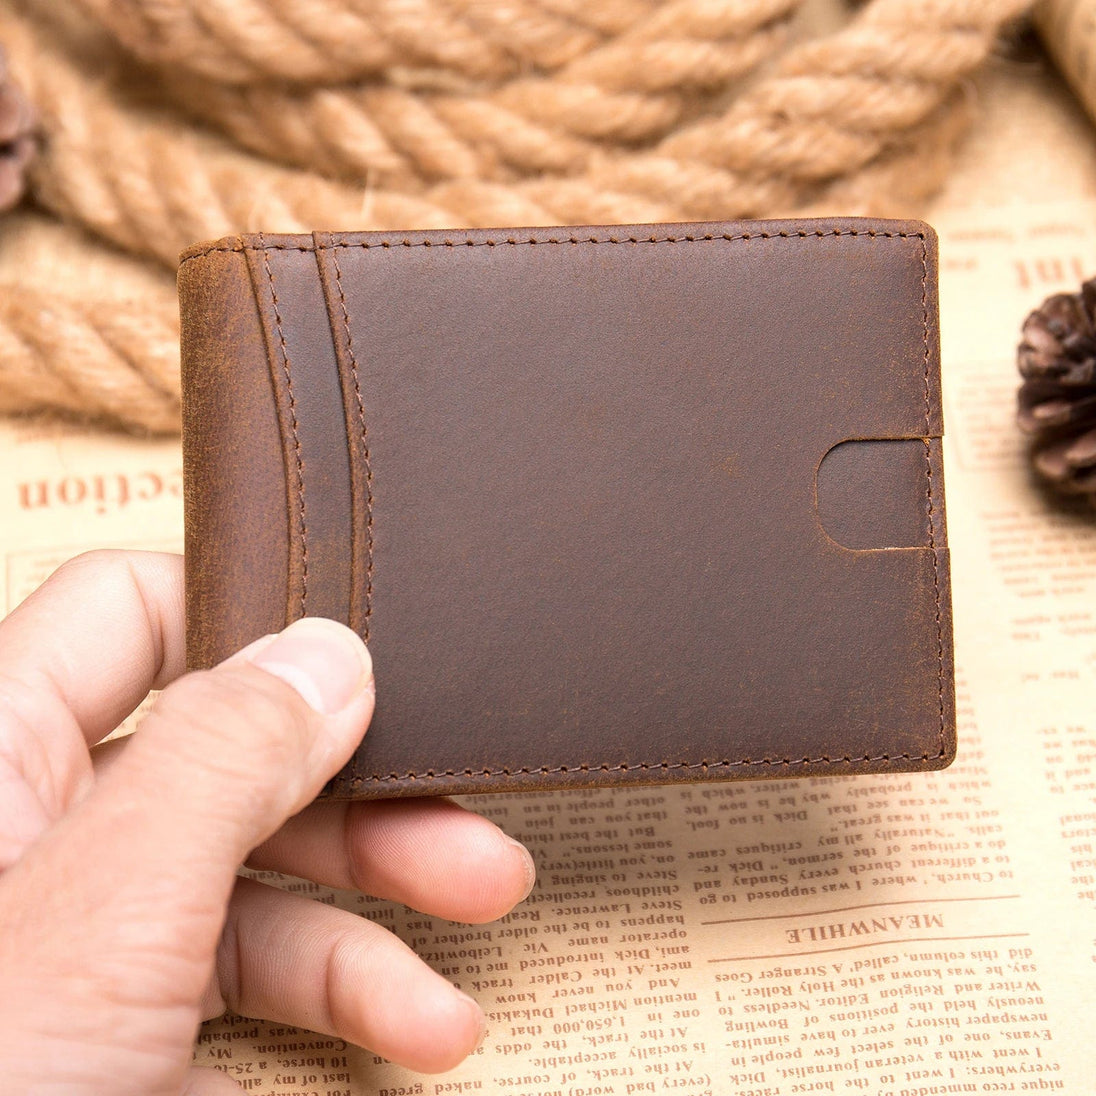 Streamlined Sophistication: Slim Bifold Men's Wallet by Marrant with Money Clip and Card Holder